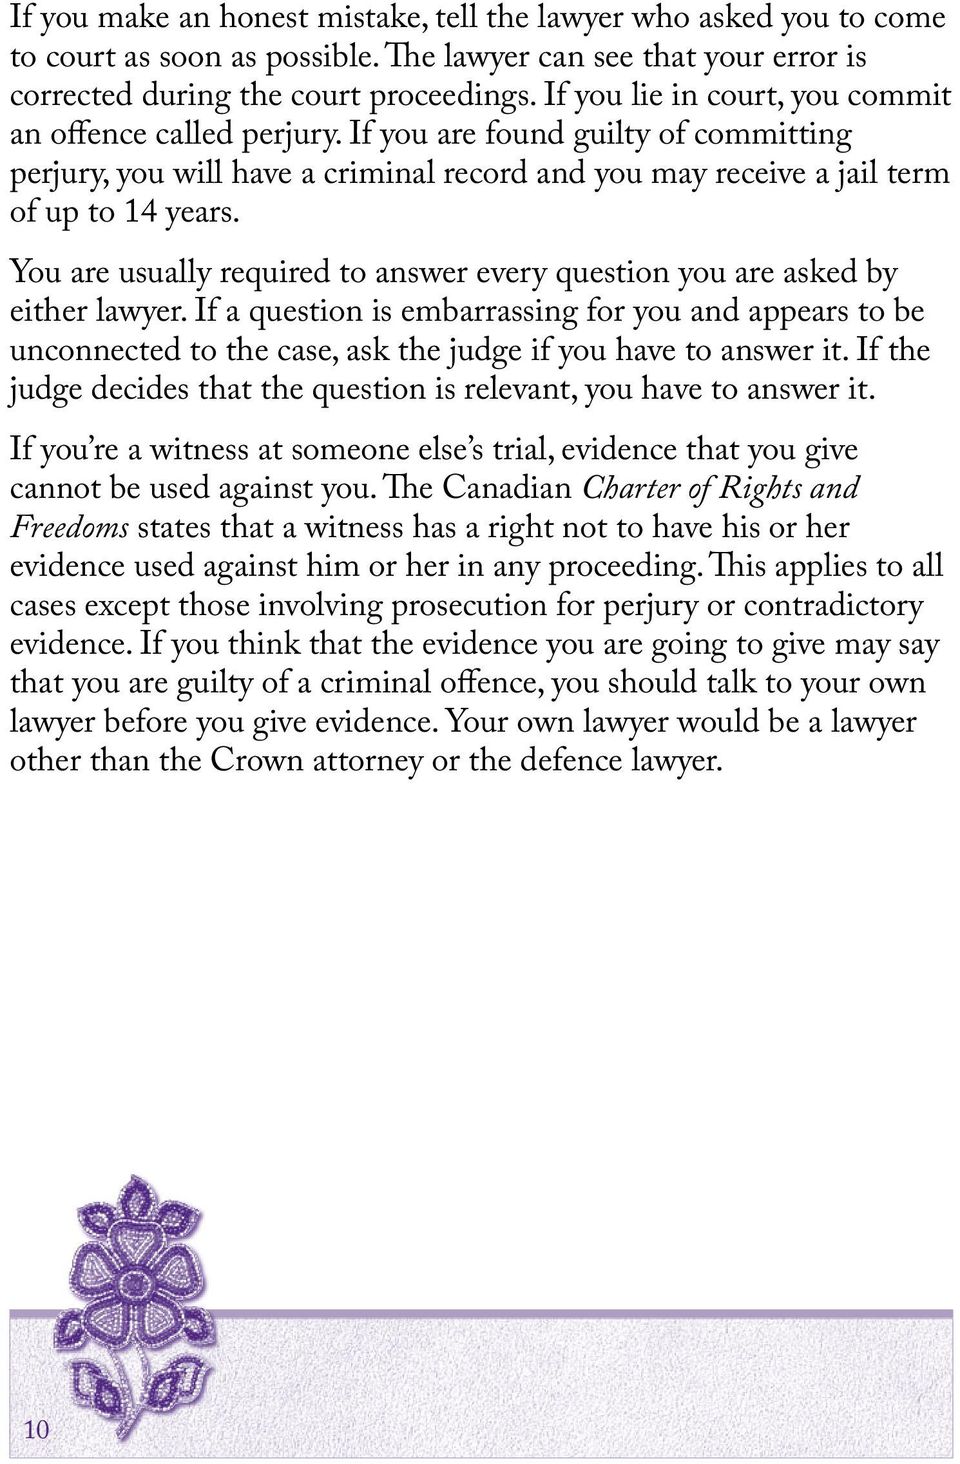 You are usually required to answer every question you are asked by either lawyer.